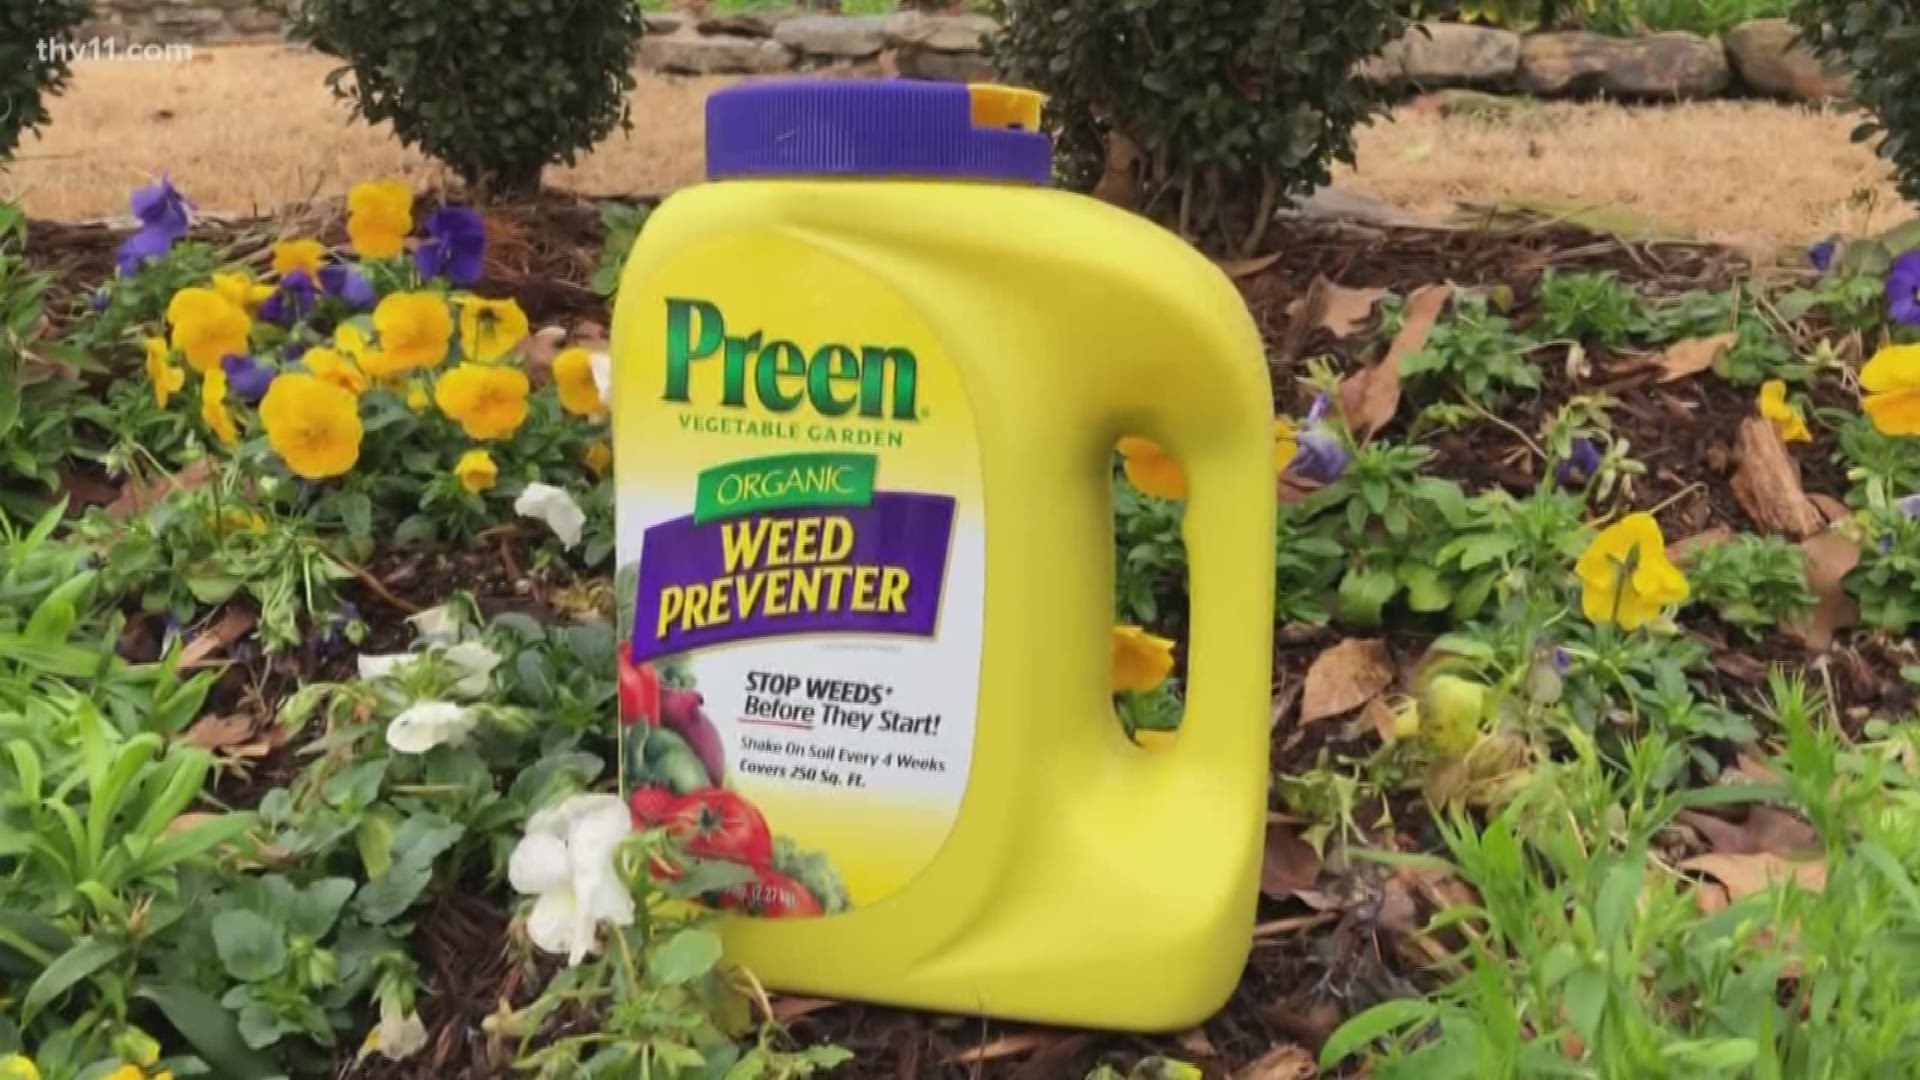 Chris H. Olsen shares with us what products to use to keep your weeds down in the winter and what products to use to get your flower beds ready for Spring.